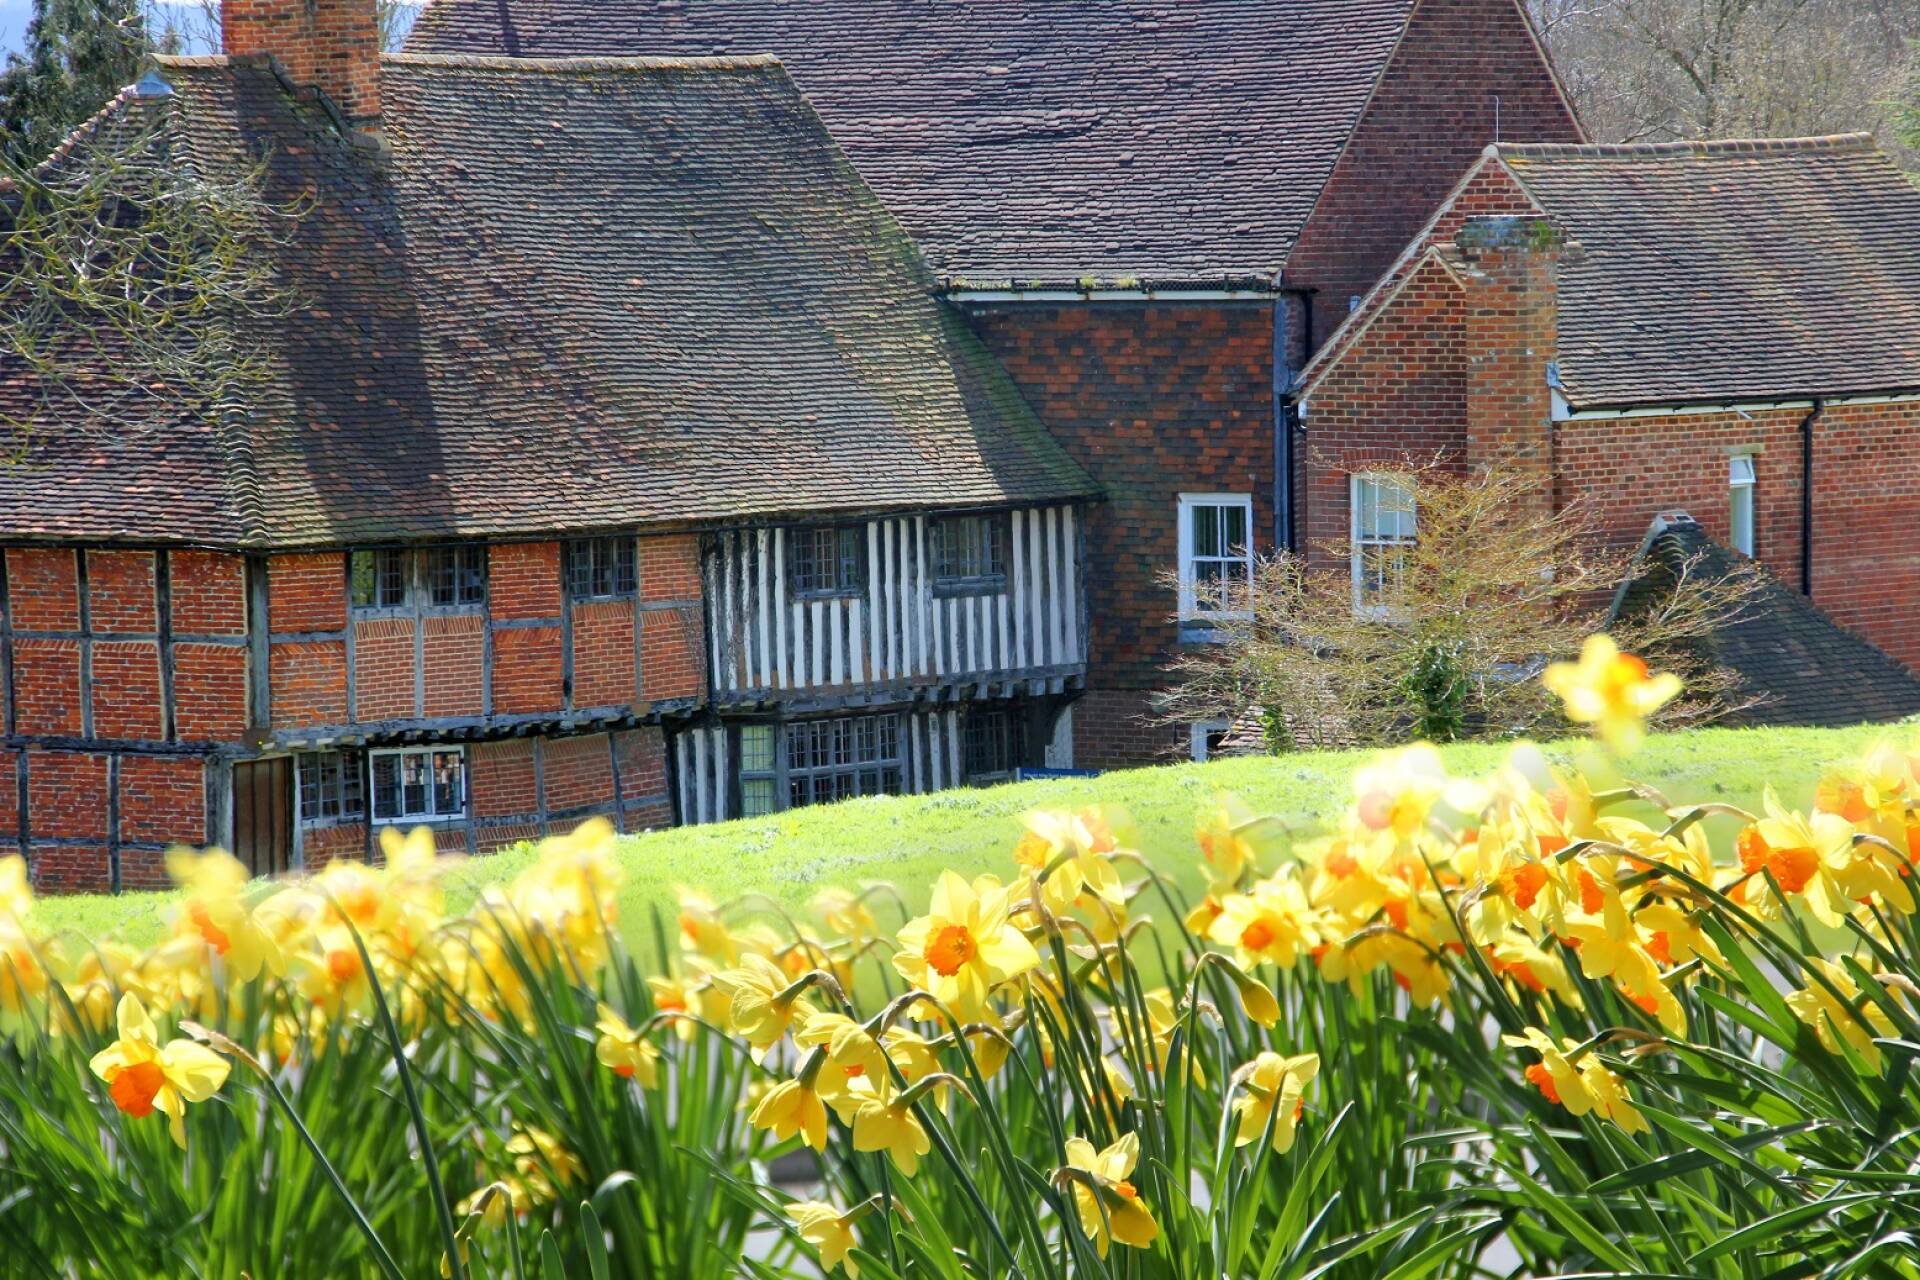 Exterior of Beverley Farmhouse in Spring surrounded by daffodils